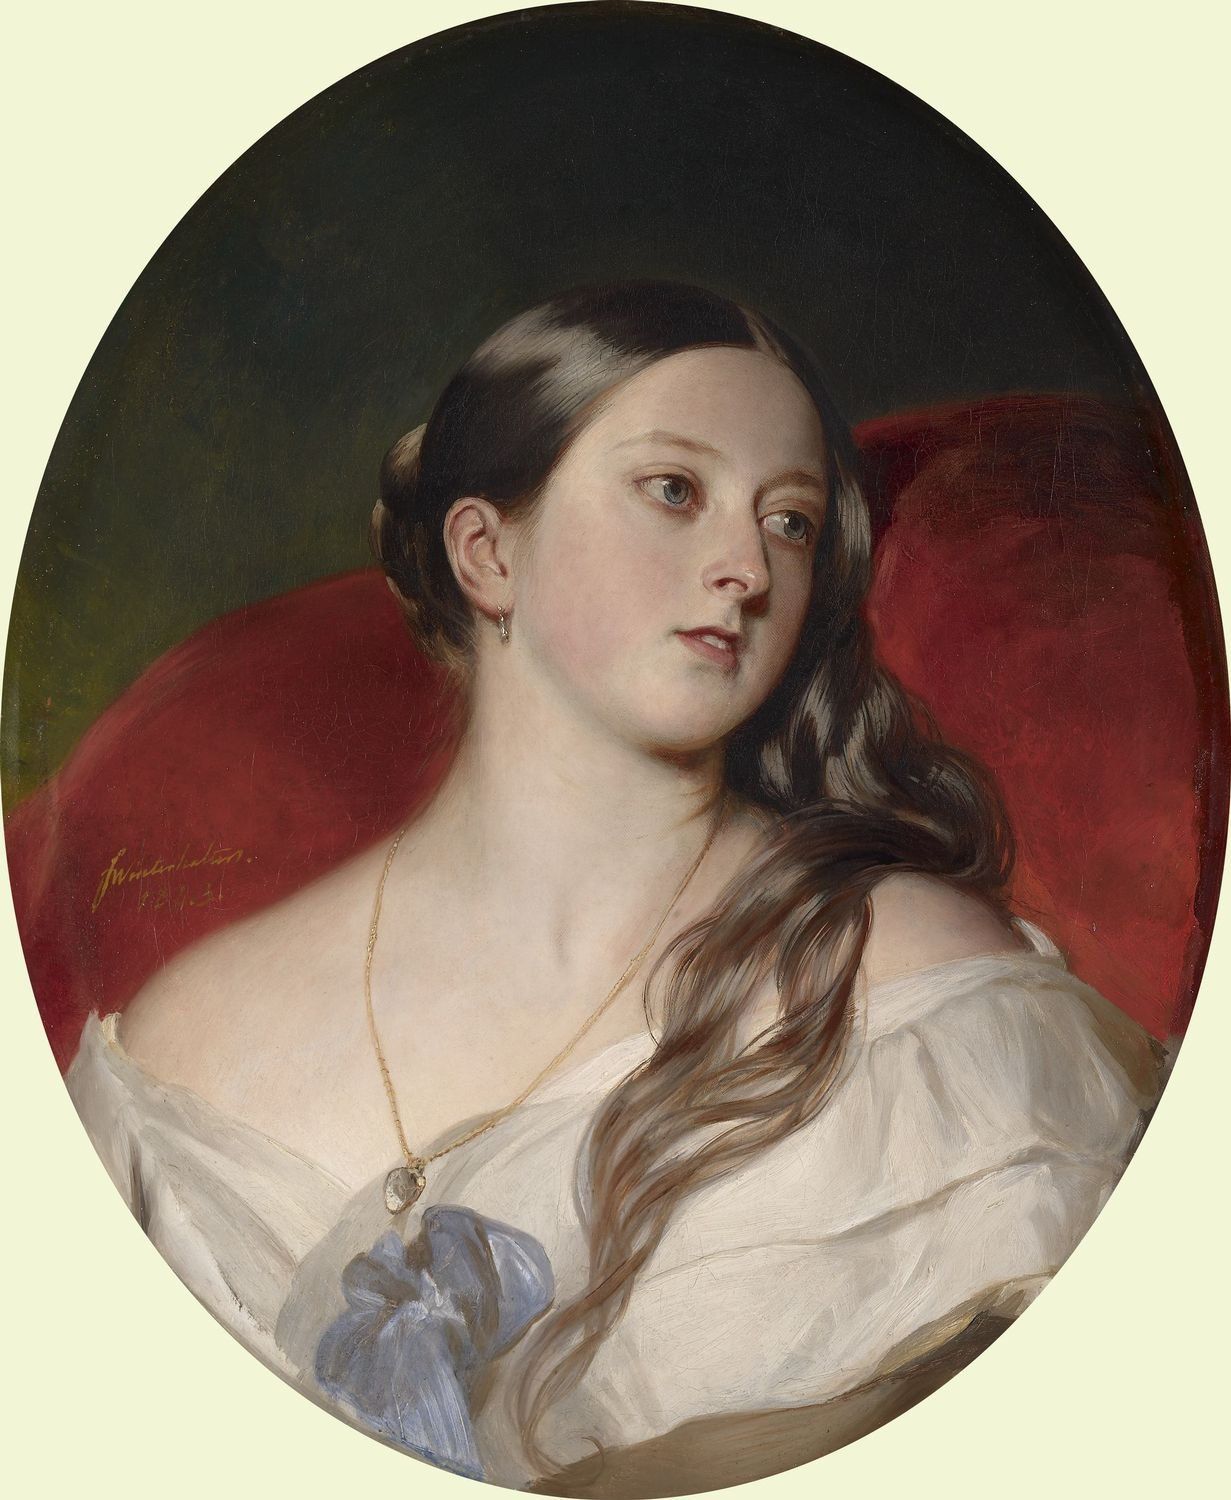 This pendant looks to be a glass heart-shaped locket containing a lock of Prince Albert's hair which the Queen wore 'day and night' before her marriage. The portrait is the "secret picture" of Queen Victoria commissioned as a gift for husband Albert's 24th birthday by Franz Xaver Winterhalter in 1843, Royal Collection Trust. .